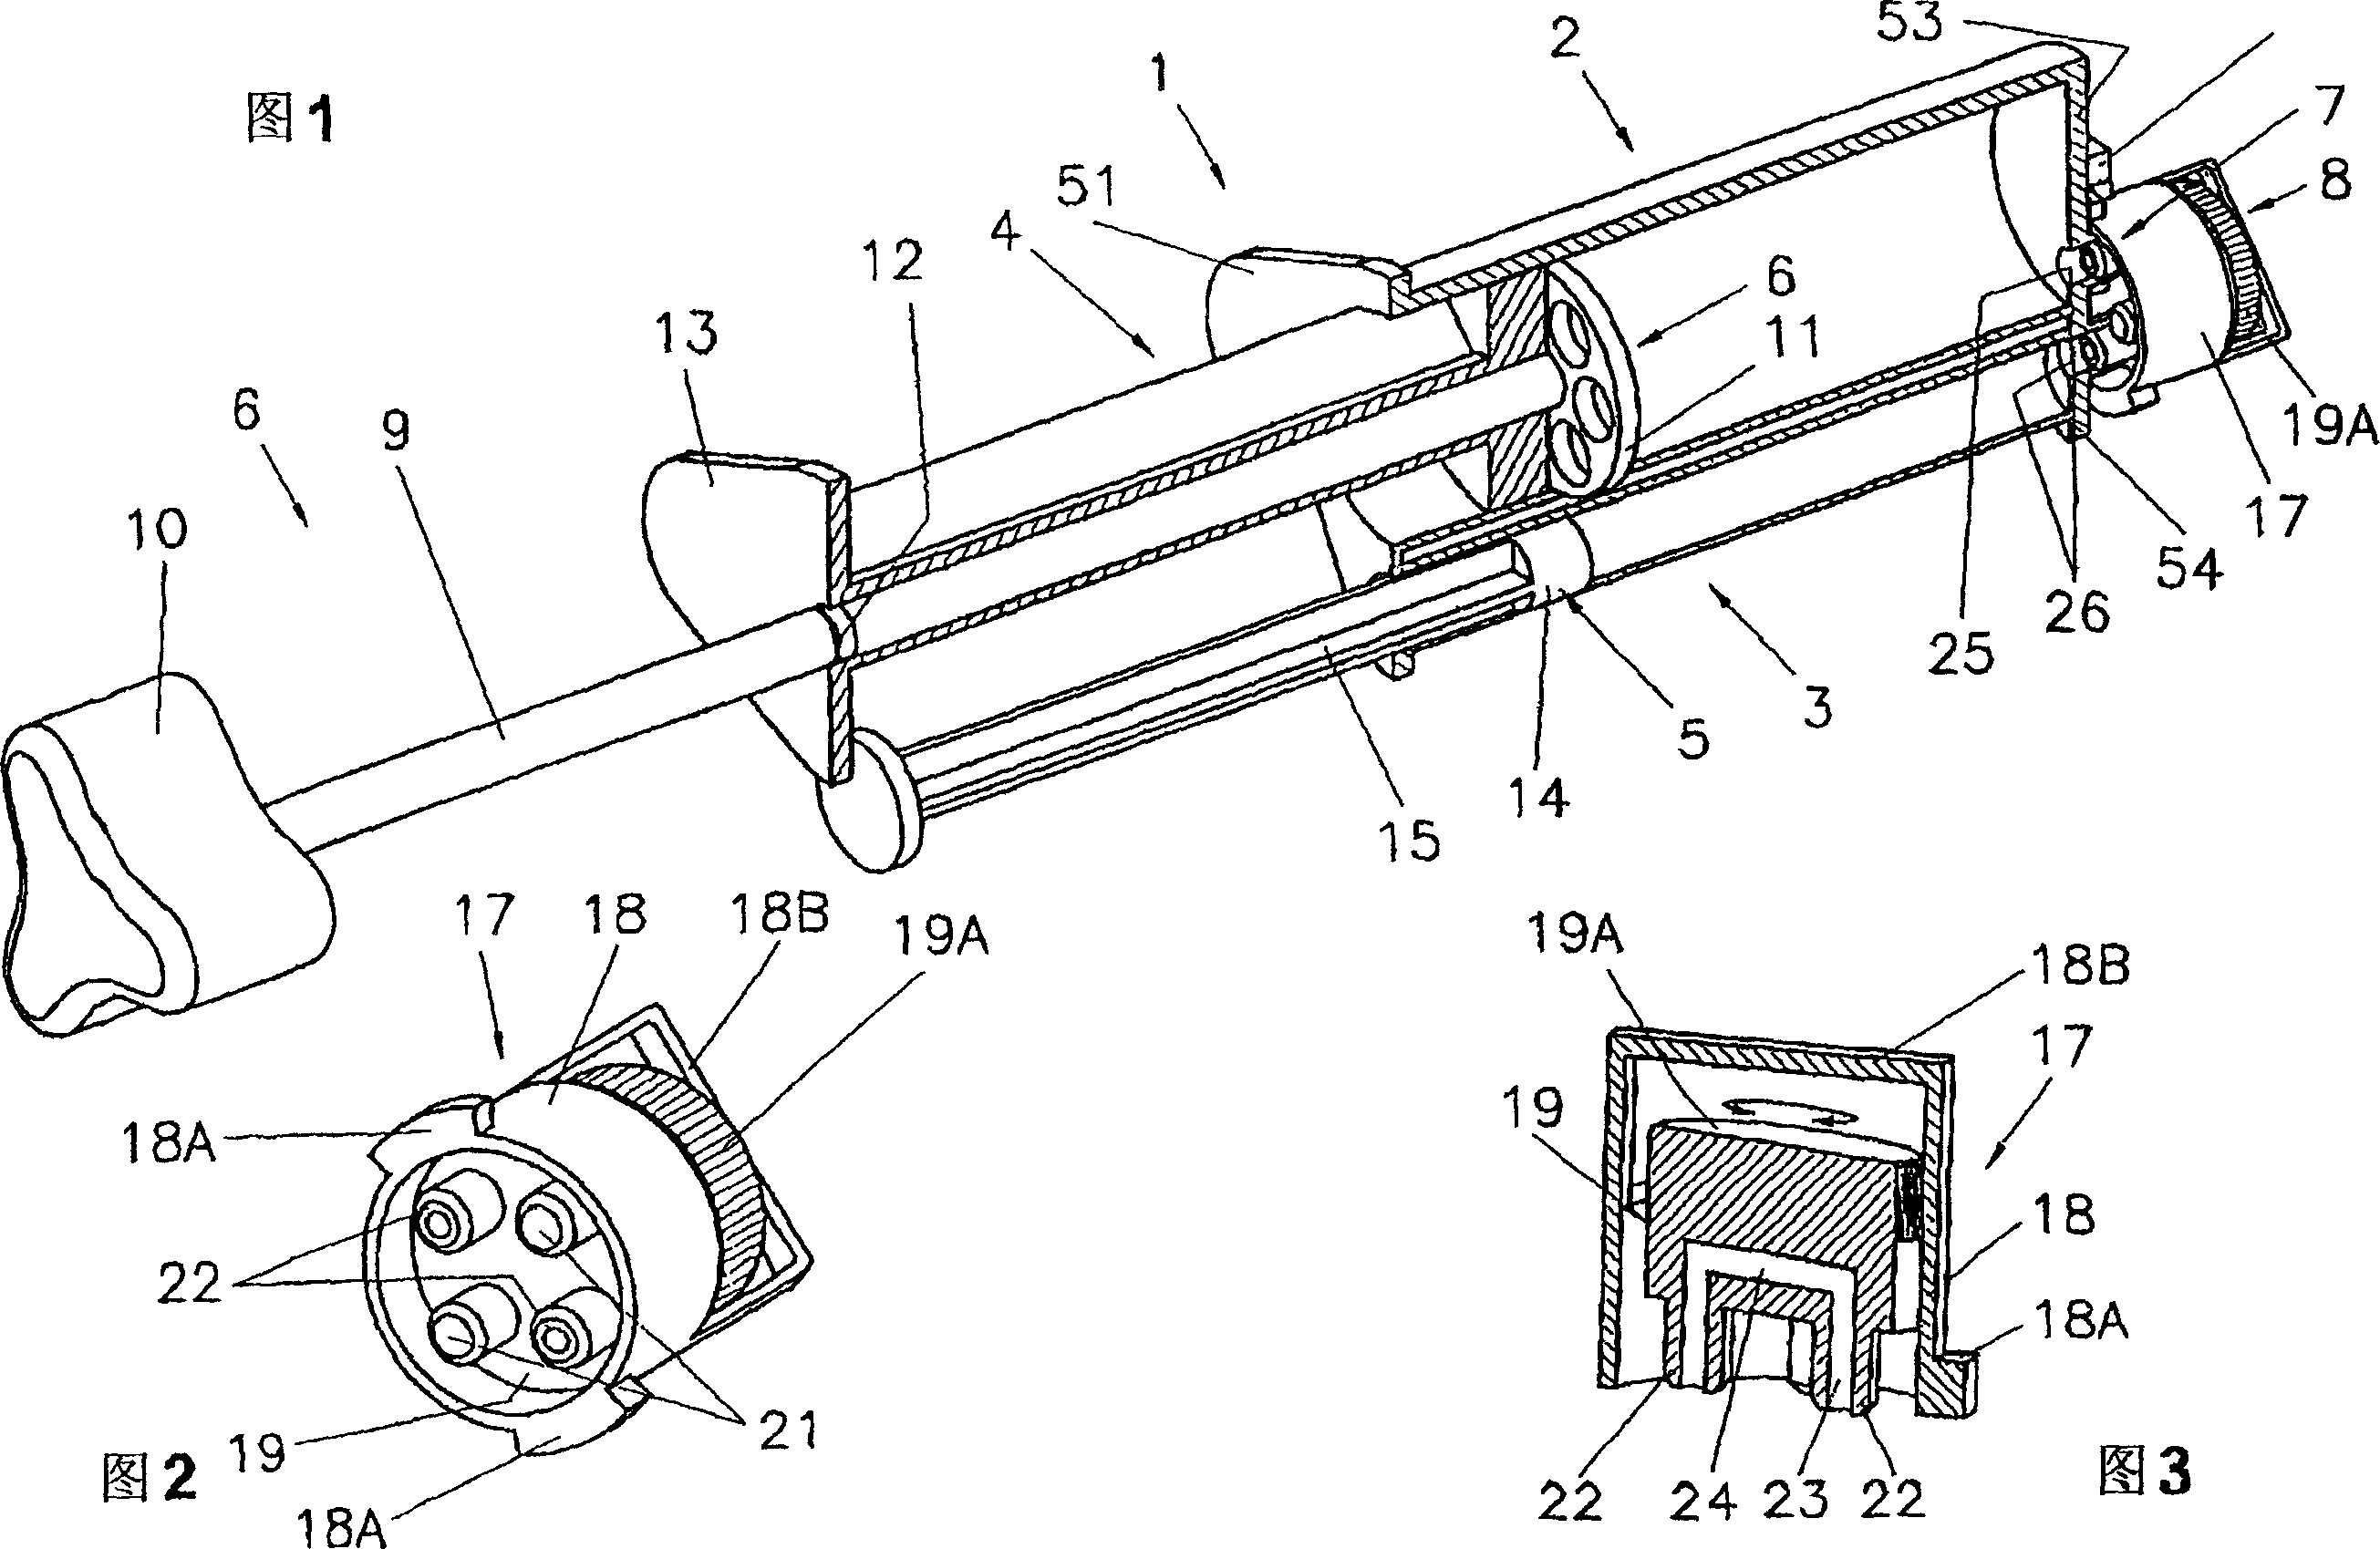 Device and method for the storage, mixing and dispensing of components